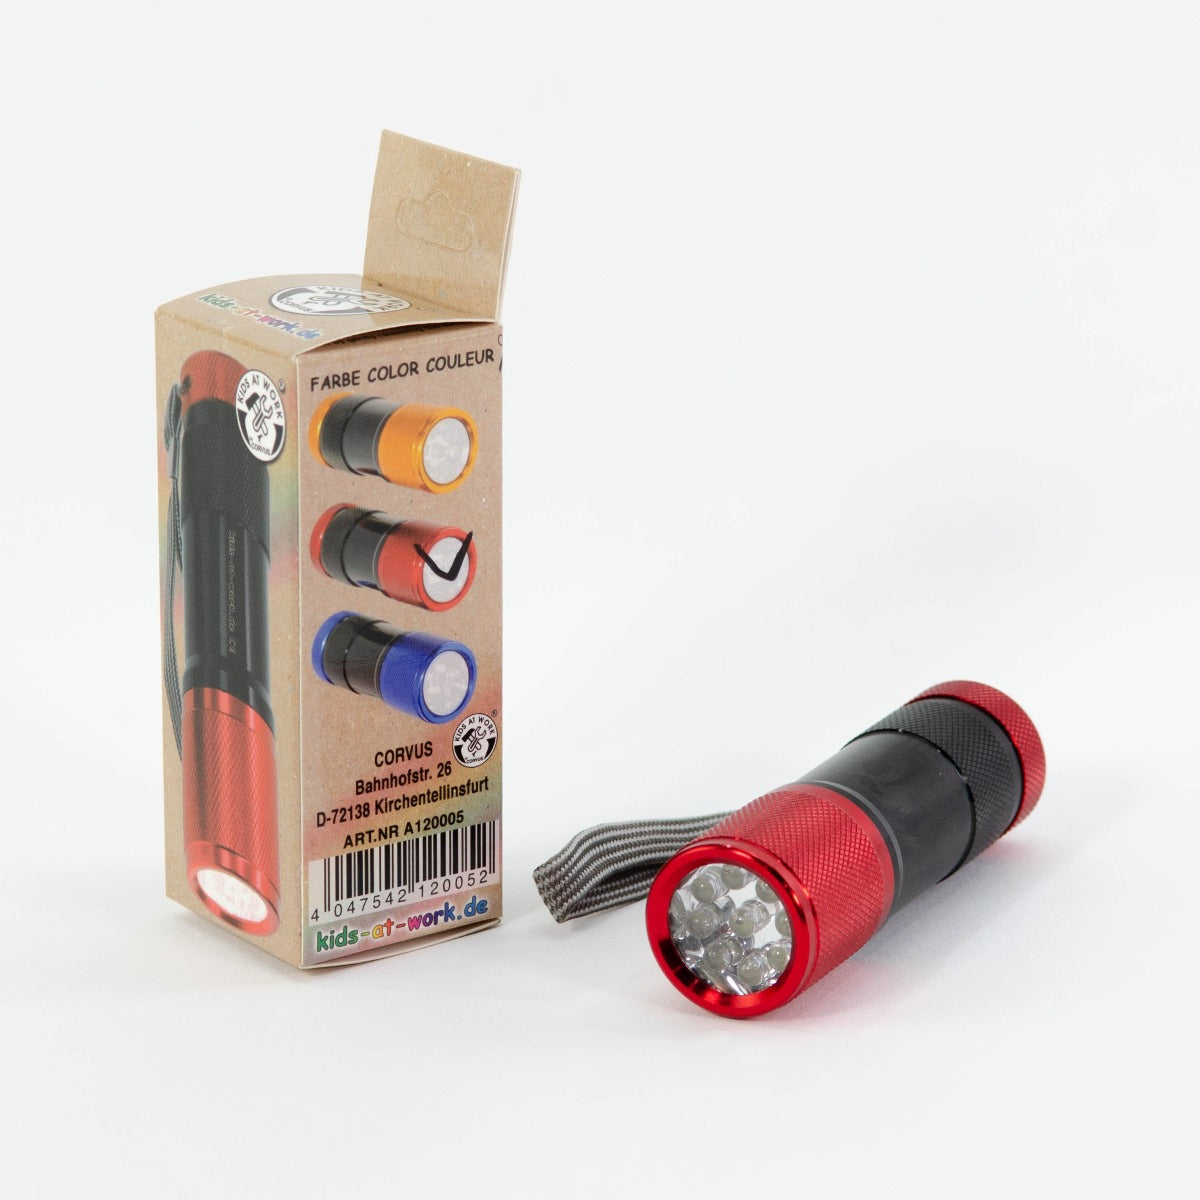 A120005 Kids at work LED Torch